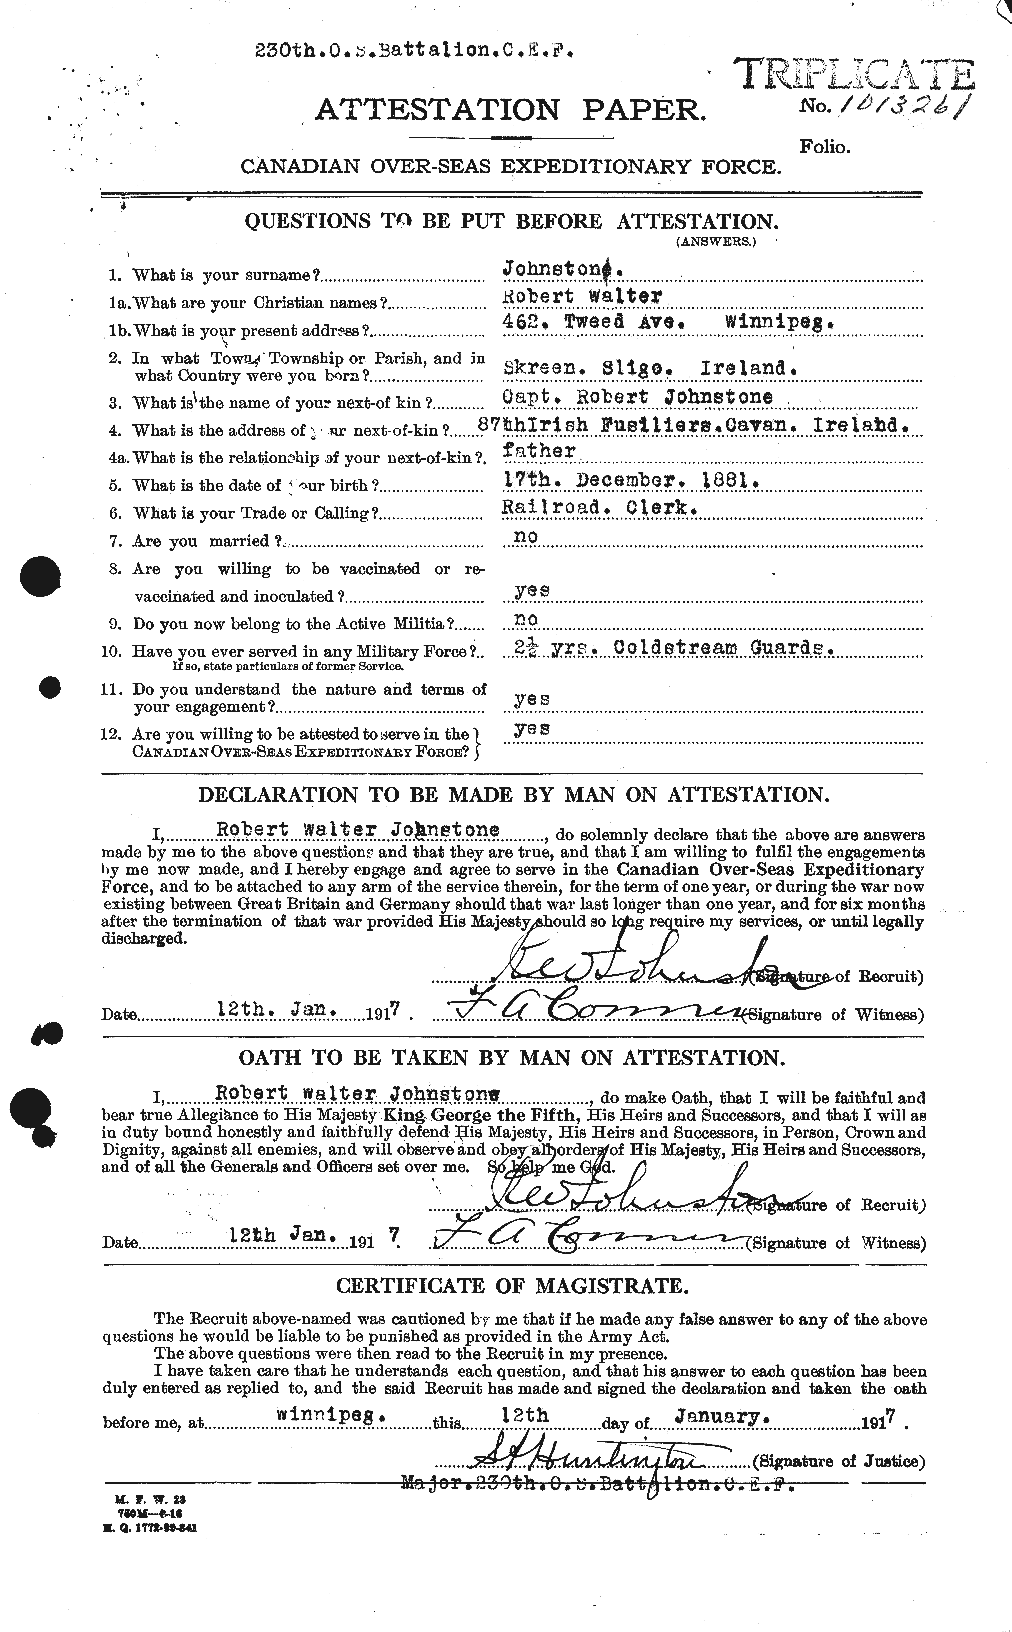 Personnel Records of the First World War - CEF 427041a